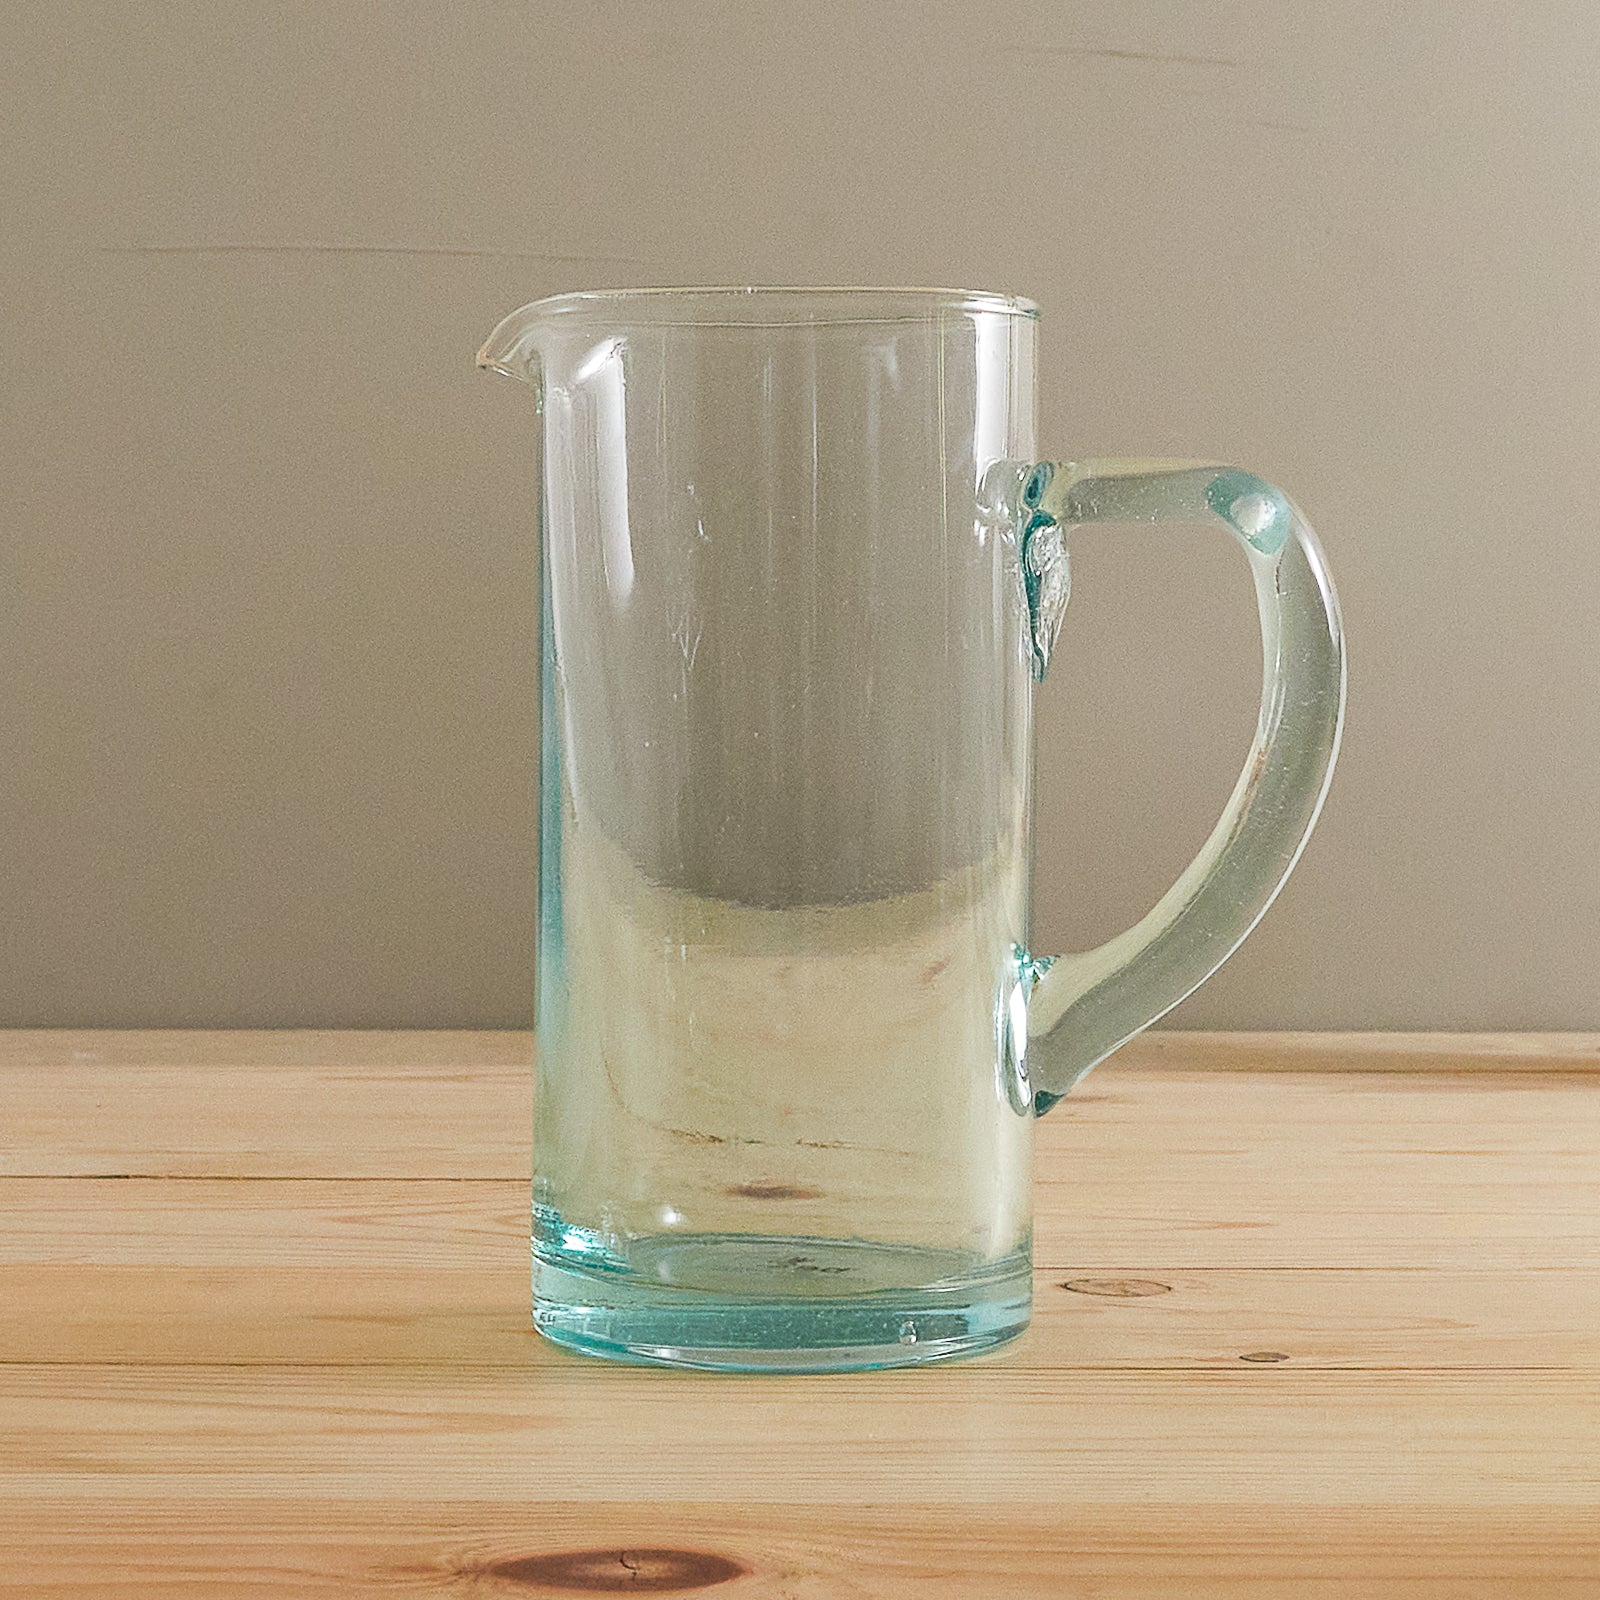 Serving Pitchers & Carafes - Clear Glass Carafe with Mug